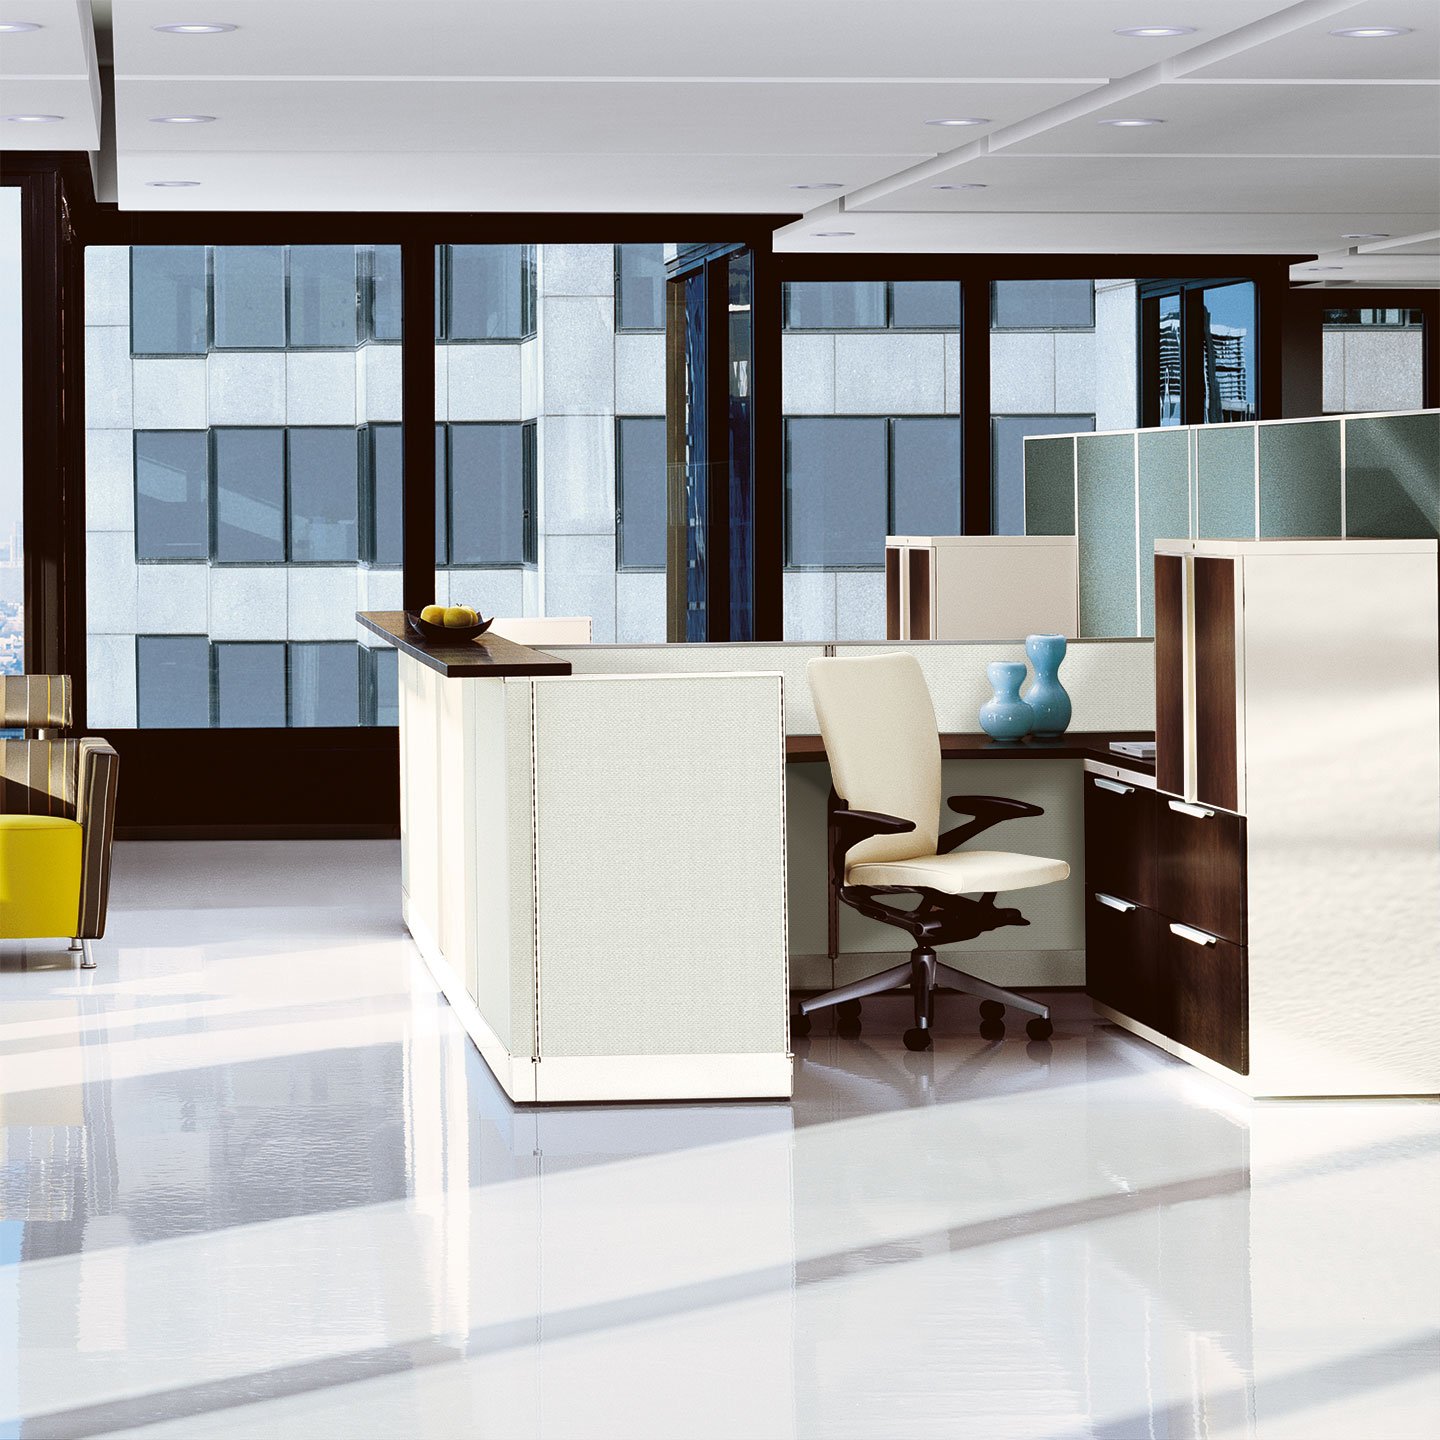 Haworth Unigroup Too Workspace in open office setting with white chair and white privacy walls 